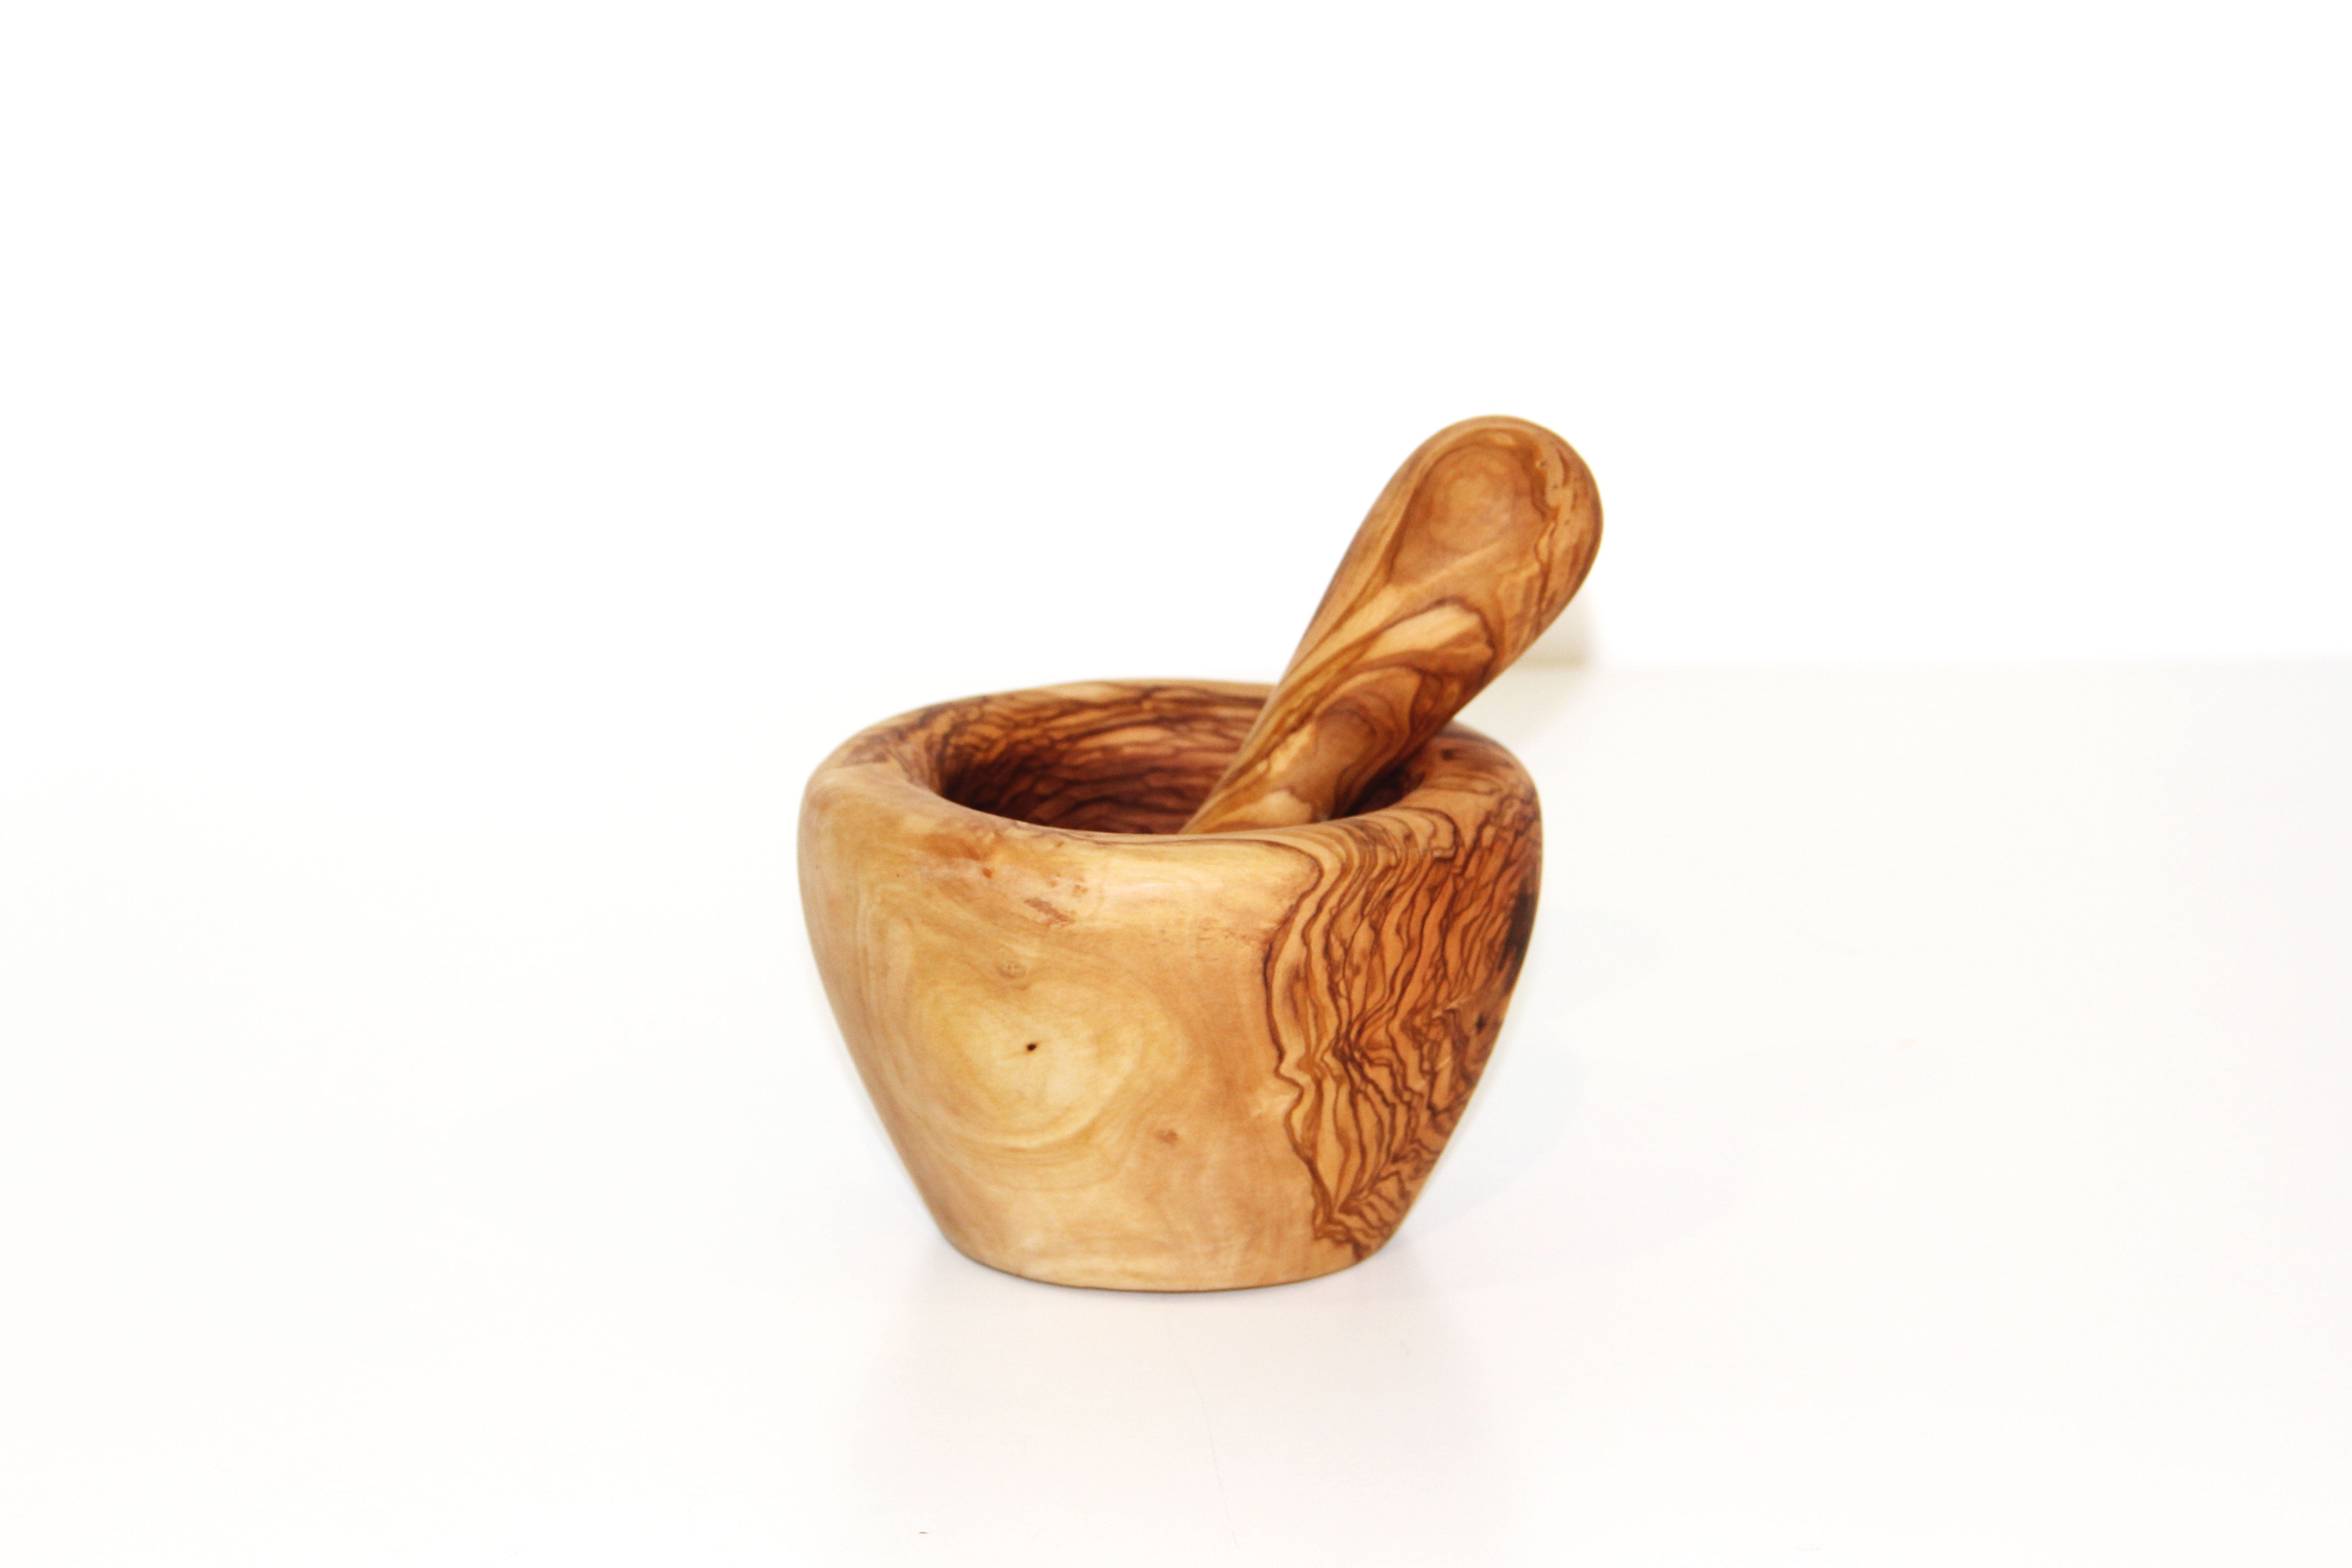 Olive wood mortar with pestle - Small model